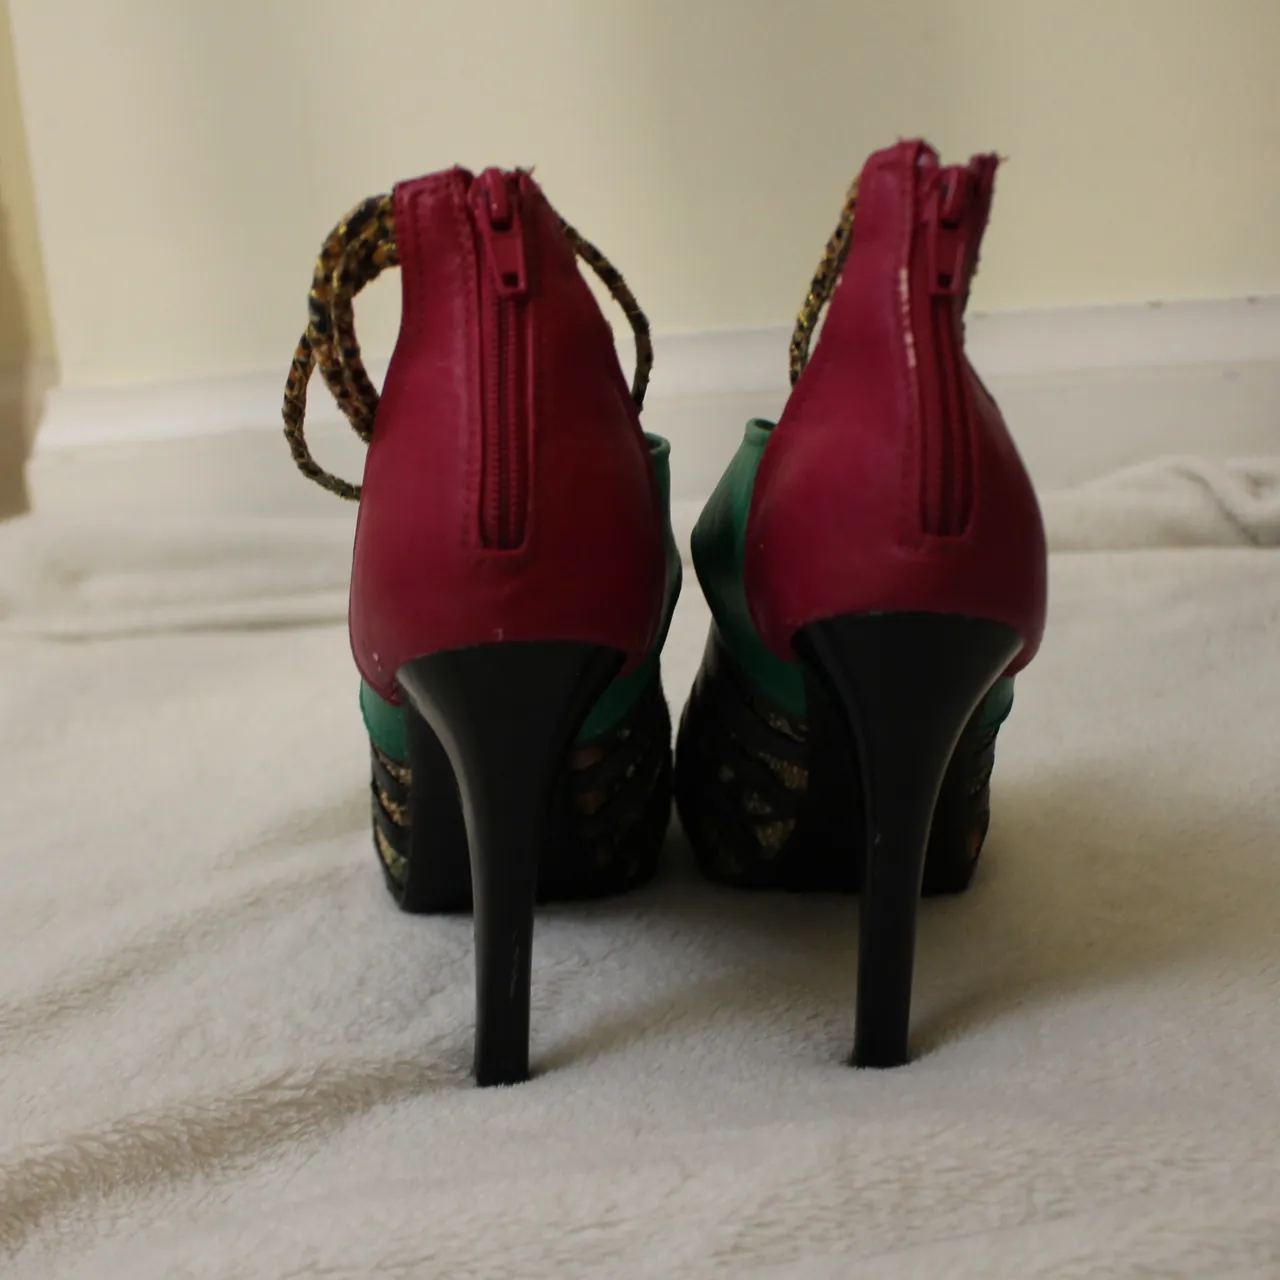 Funky Party Shoes! $25 photo 4